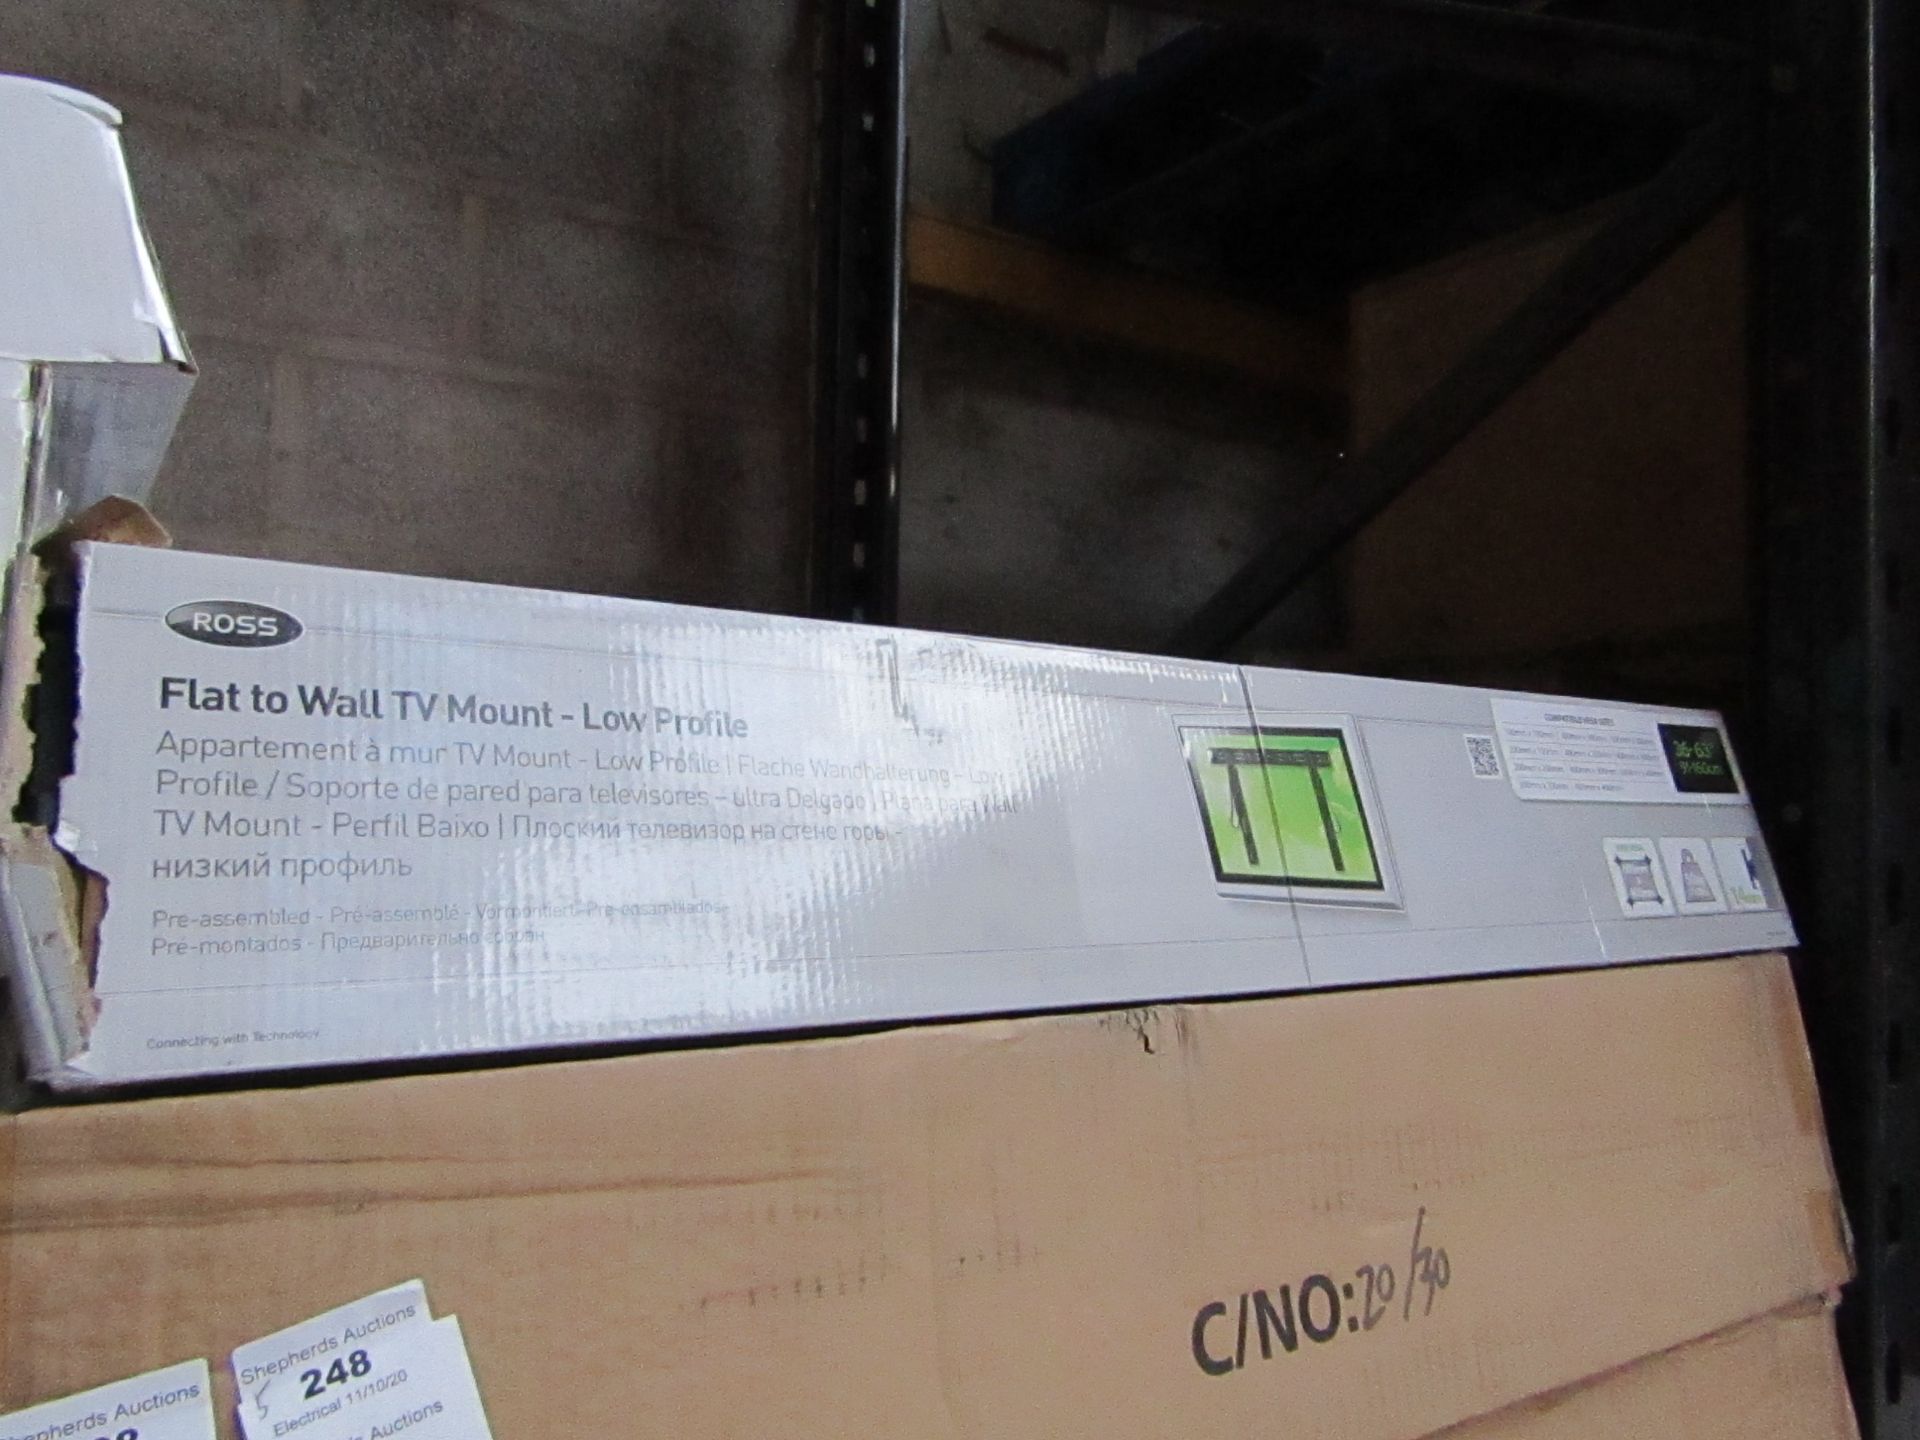 Ross - Flat To Wall TV Mount - Low Profile 36 - 63" - New & Boxed.